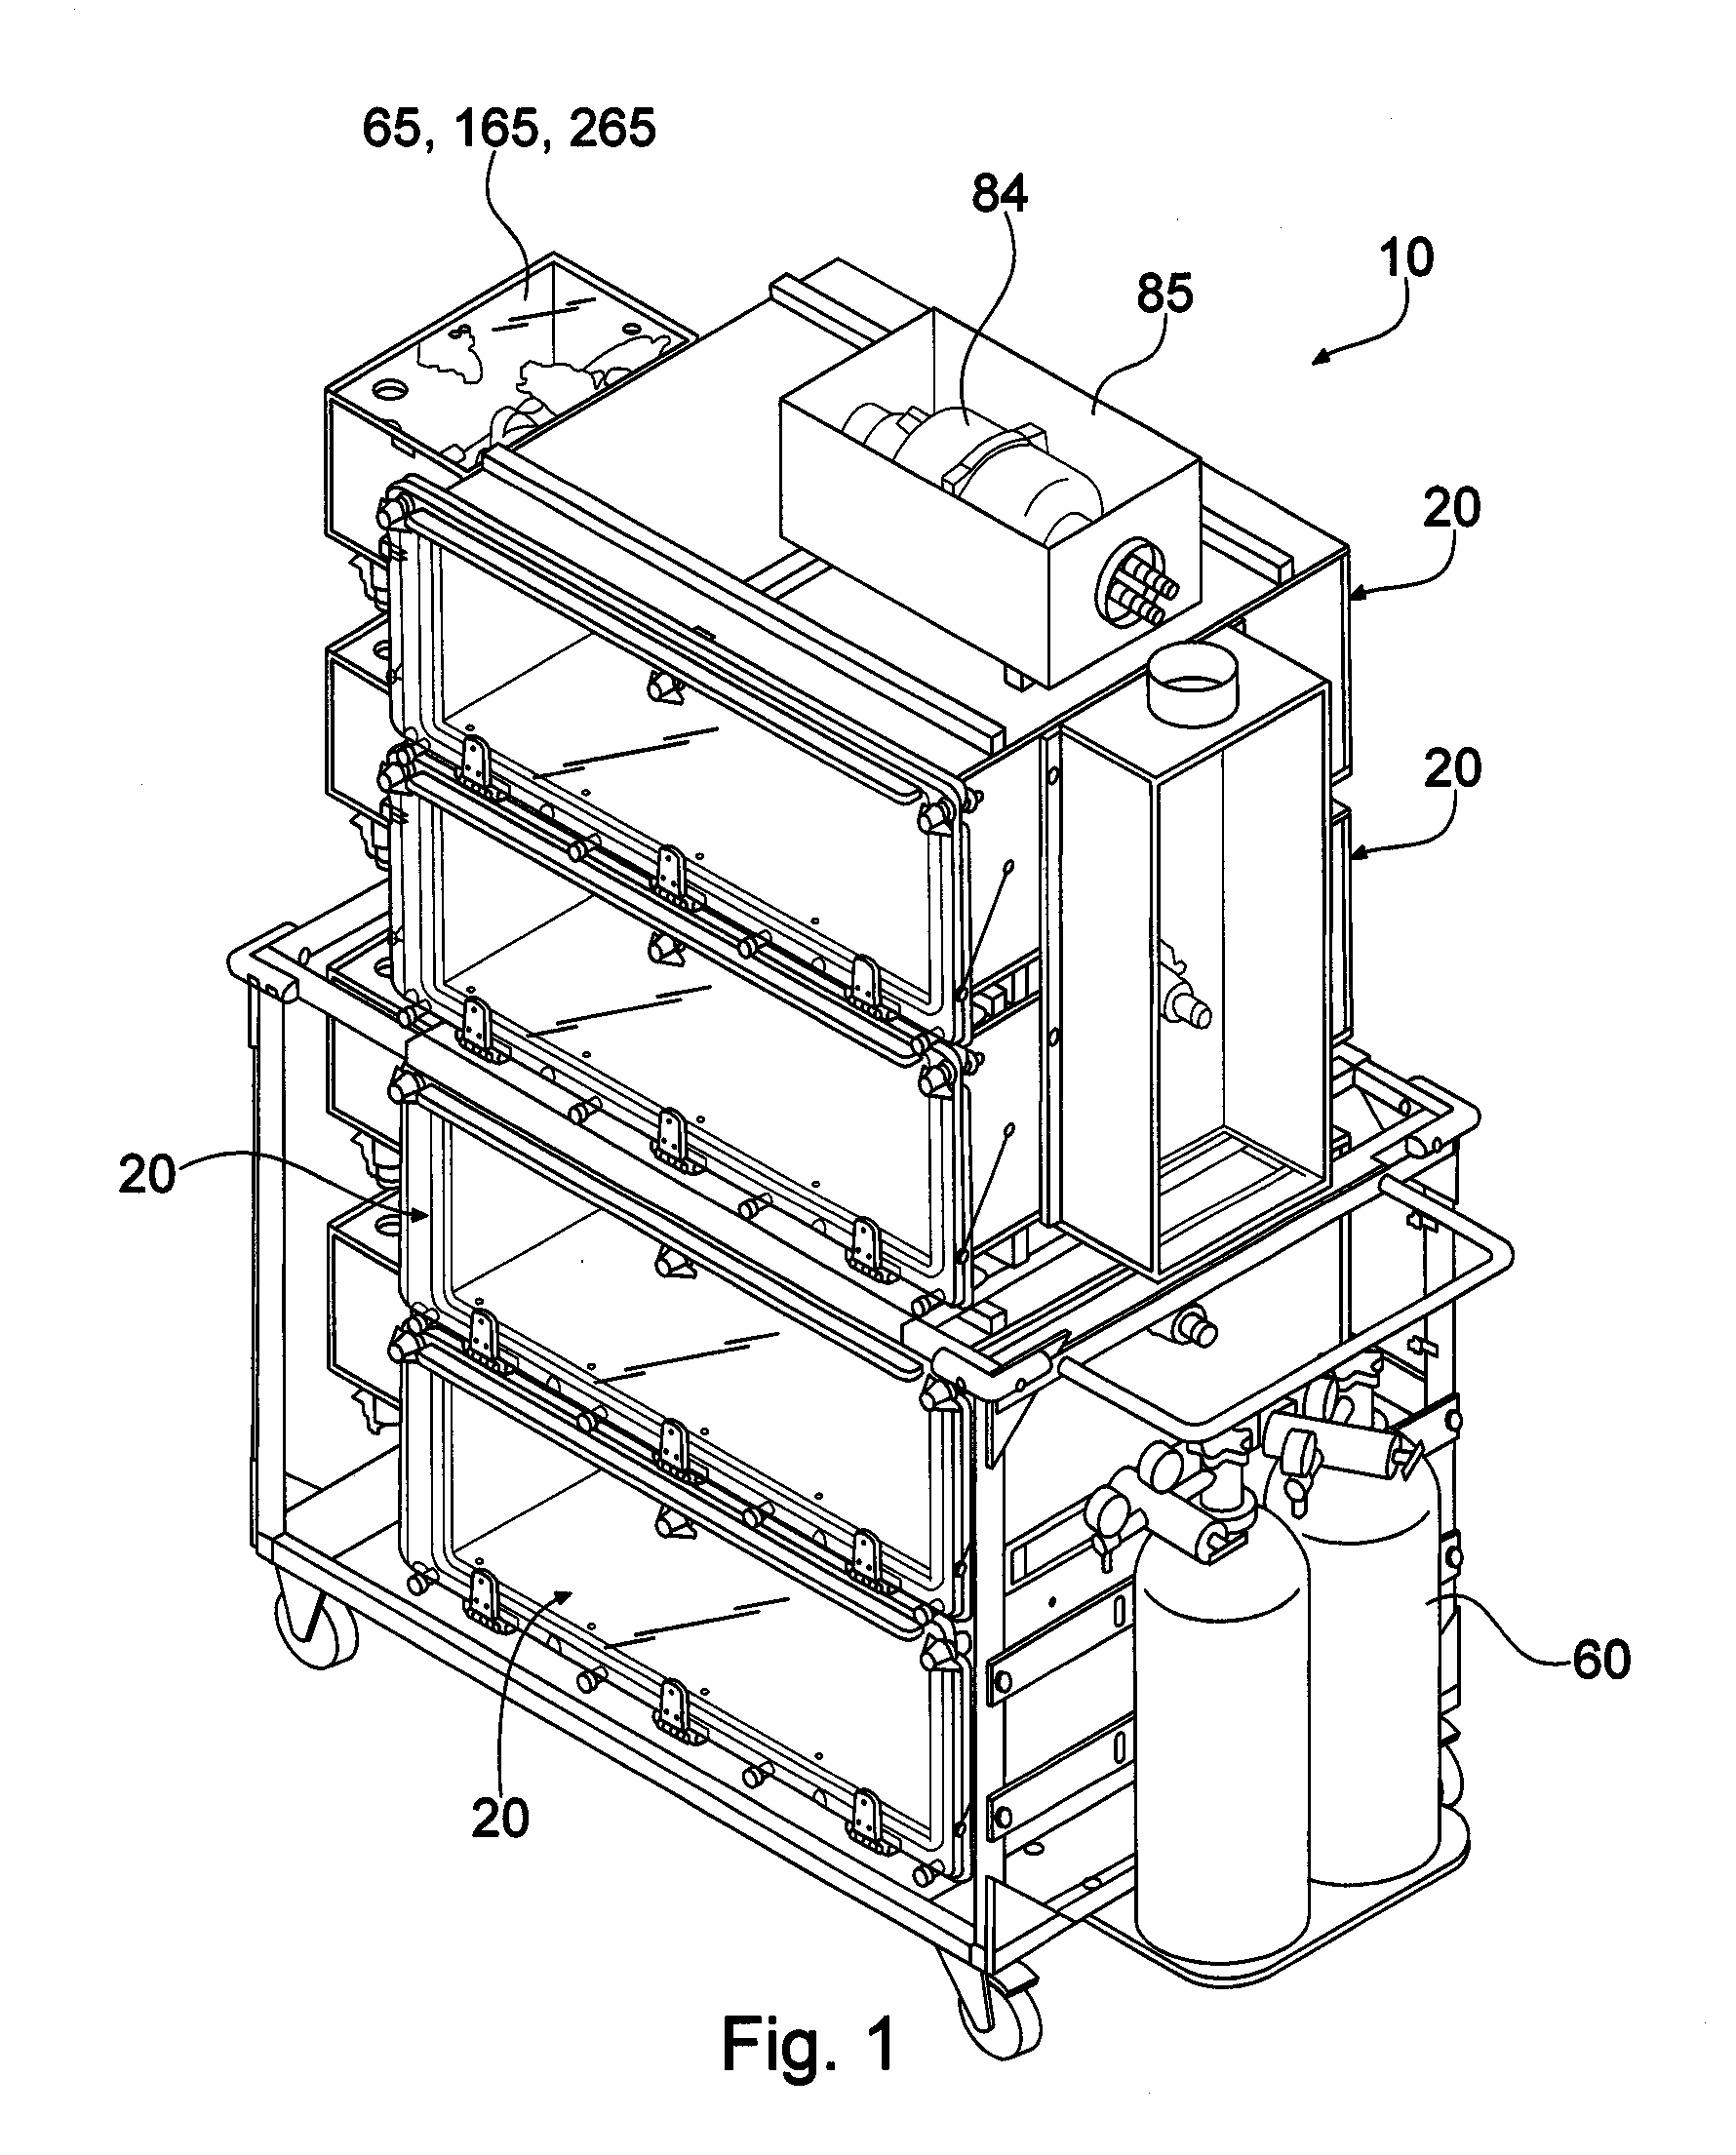 Method and Apparatus for Euthanizing Animals